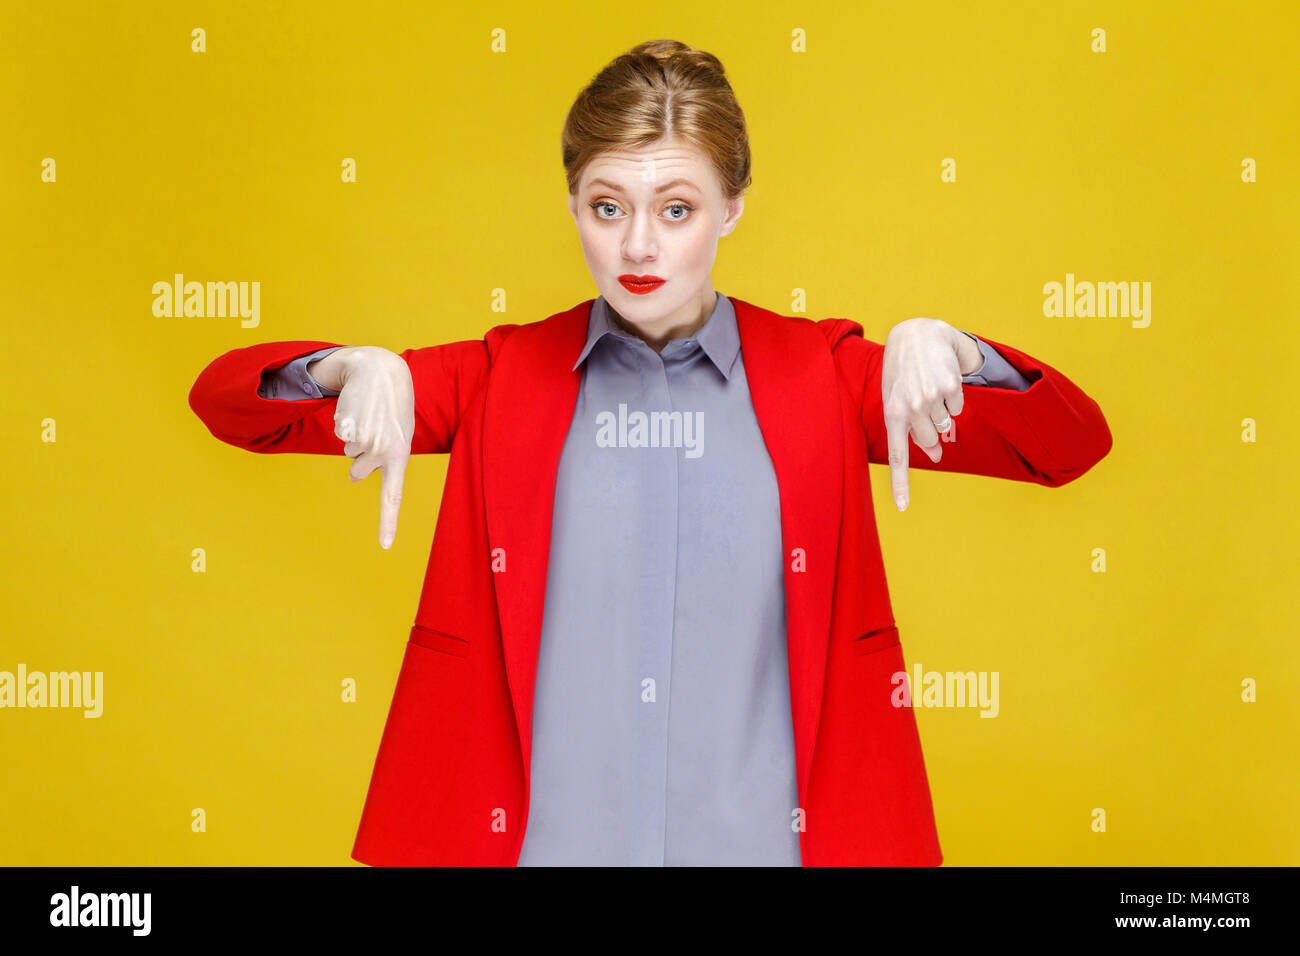 Ginger red head woman in red suit wish pointing down at copy space. Studio shot, isolated on yellow background Stock Photo